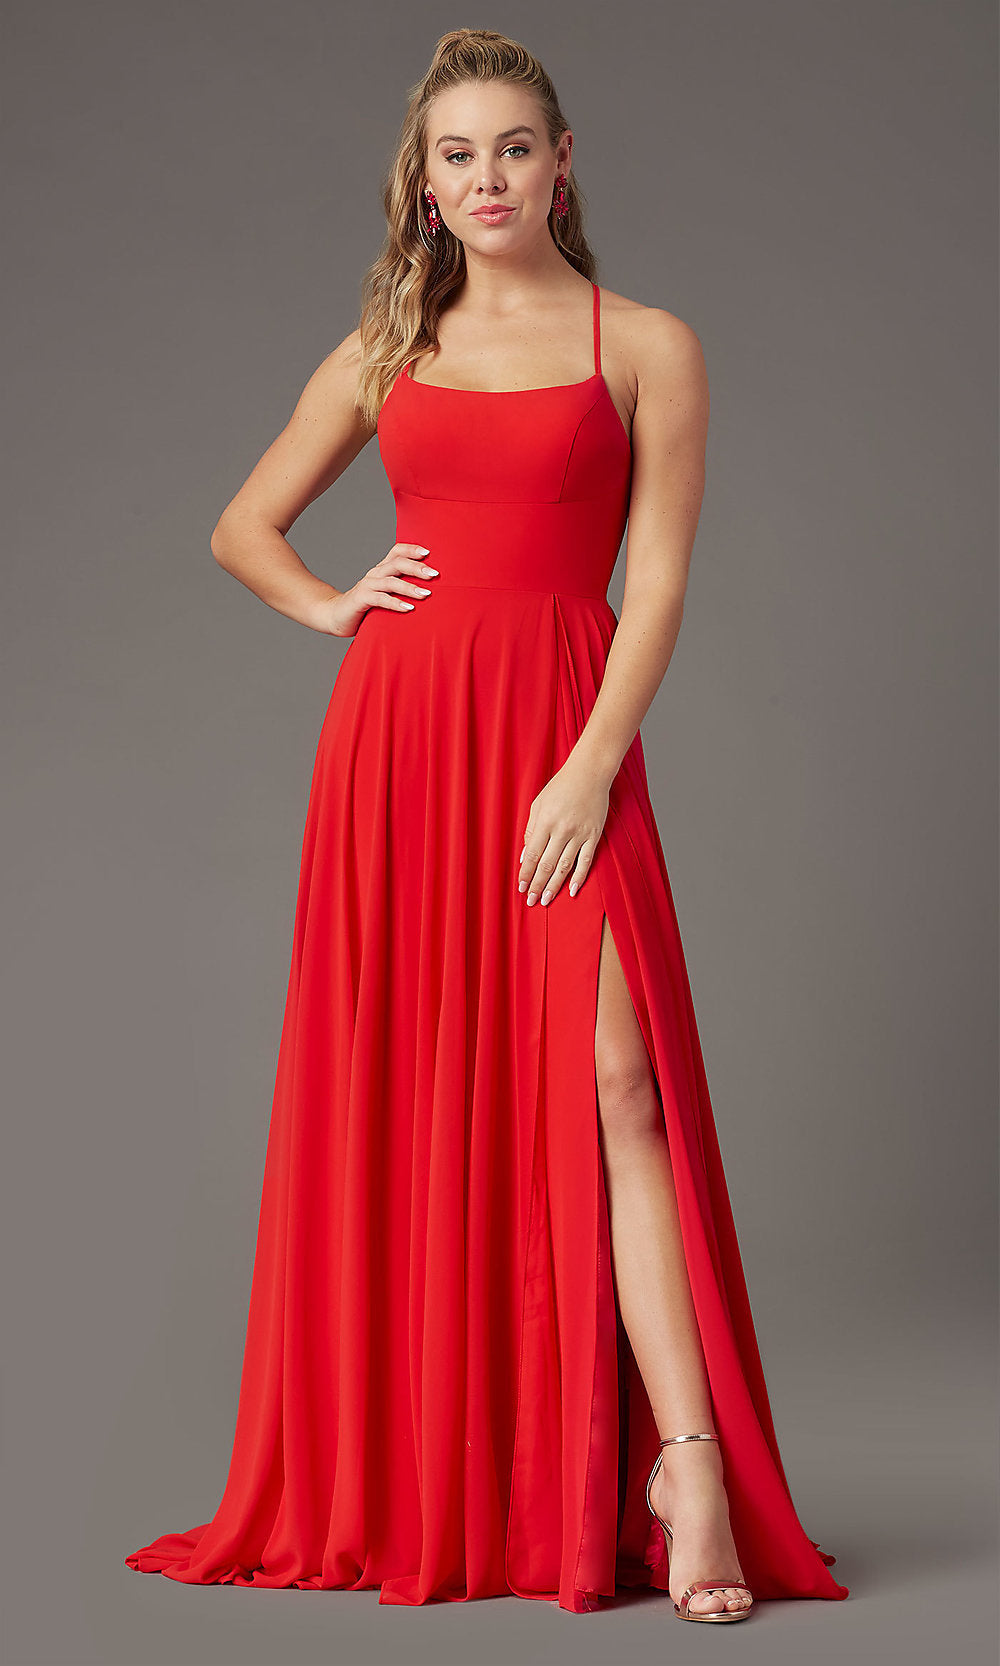 Hot Chili Long Square-Neck Formal Prom Dress by PromGirl